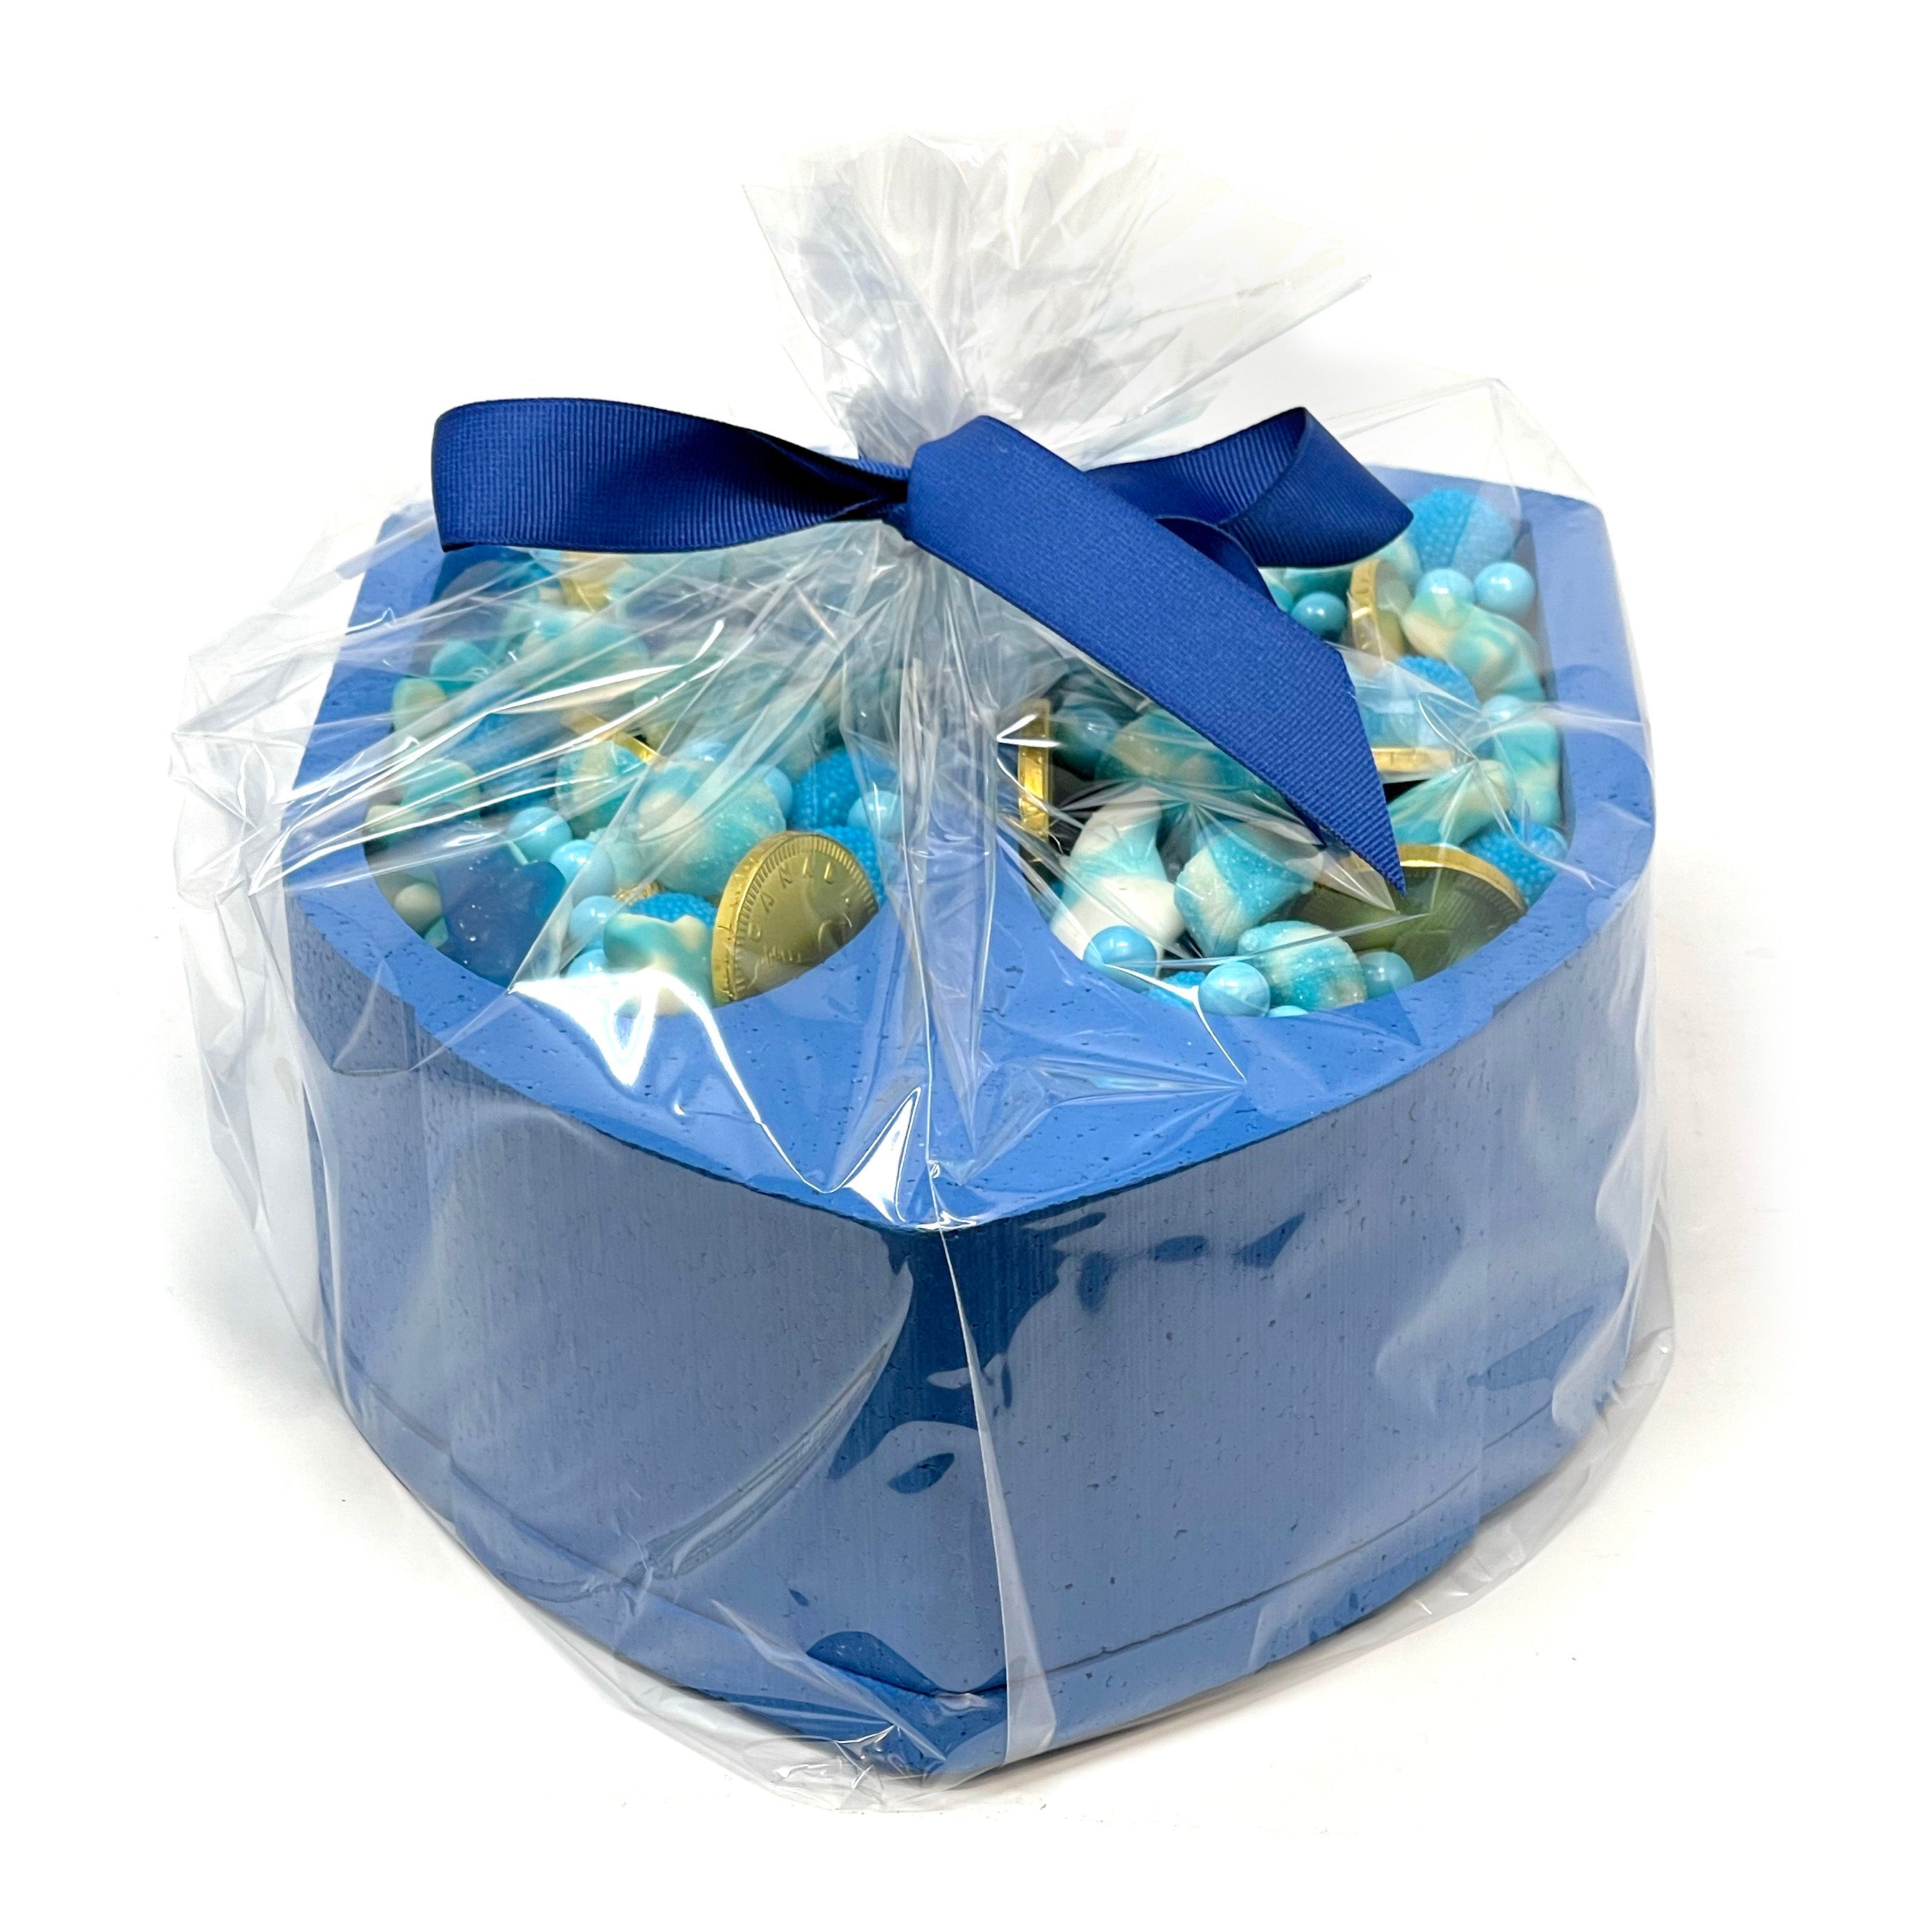 Dreidel Candy Tray-Food Gift Baskets-Charcuterie-Corporate Catering Toronto-Best Charcuterie-Catering Toronto-Cured Catering